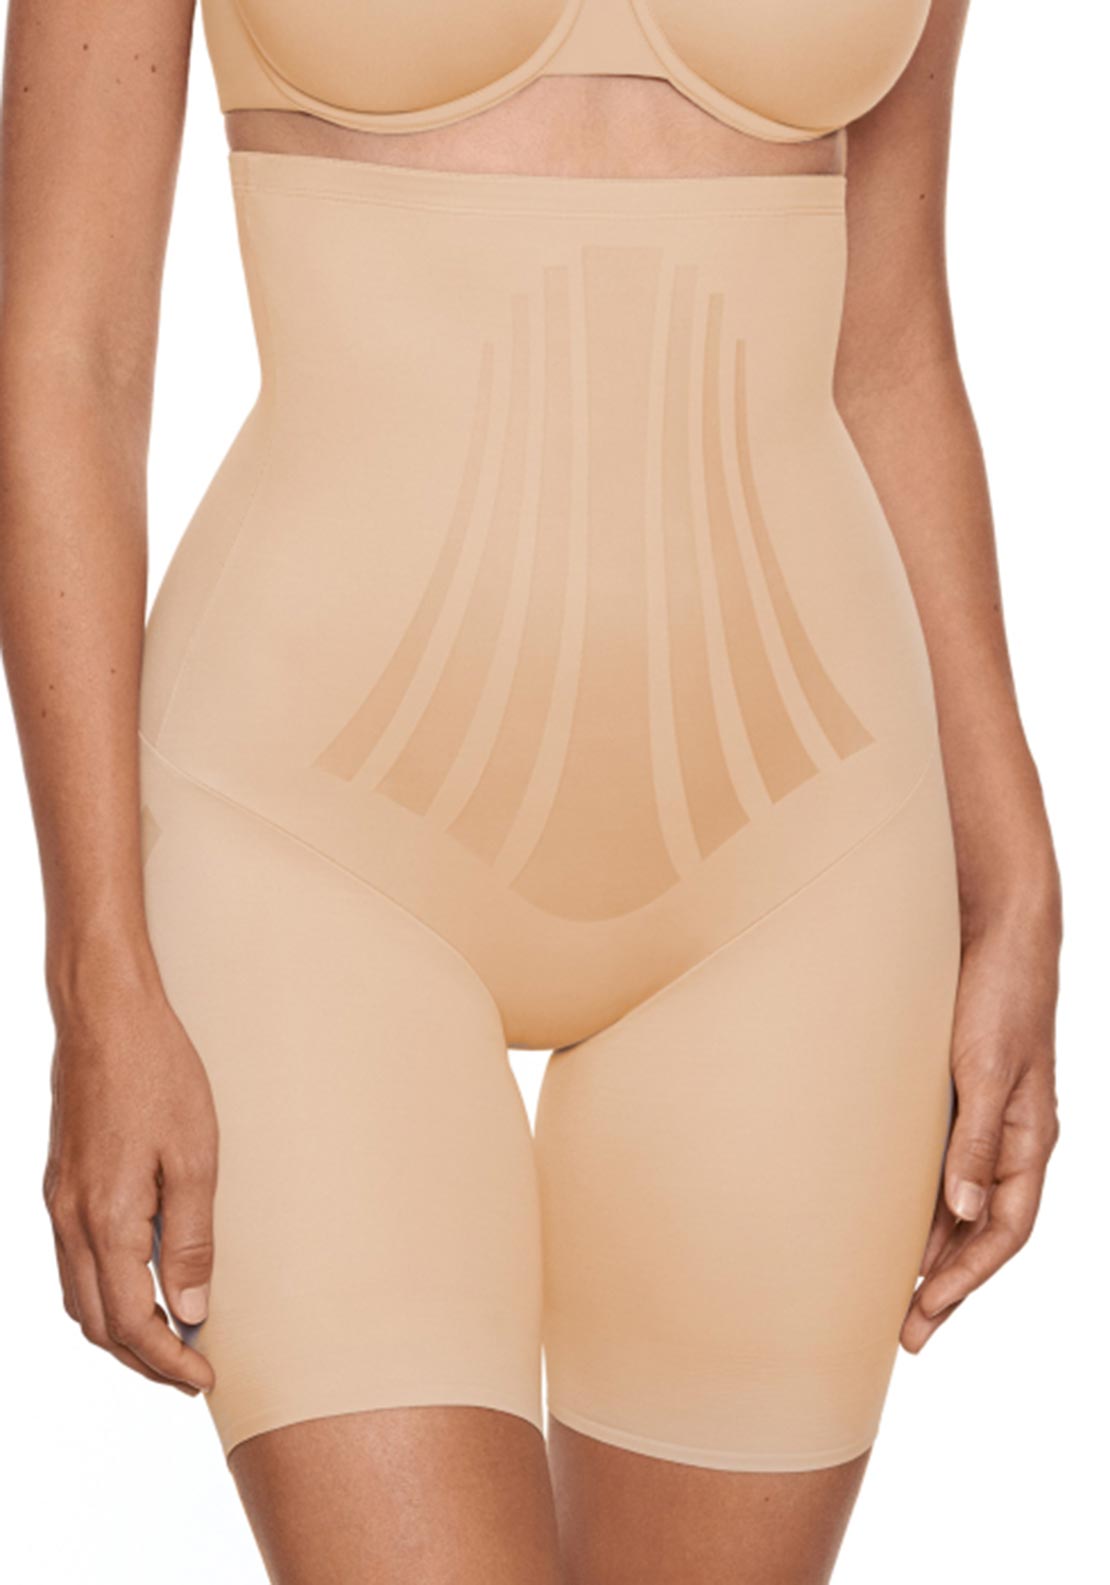 Buy Miraclesuit High Waisted Thigh Slimming Shapewear Shorts from